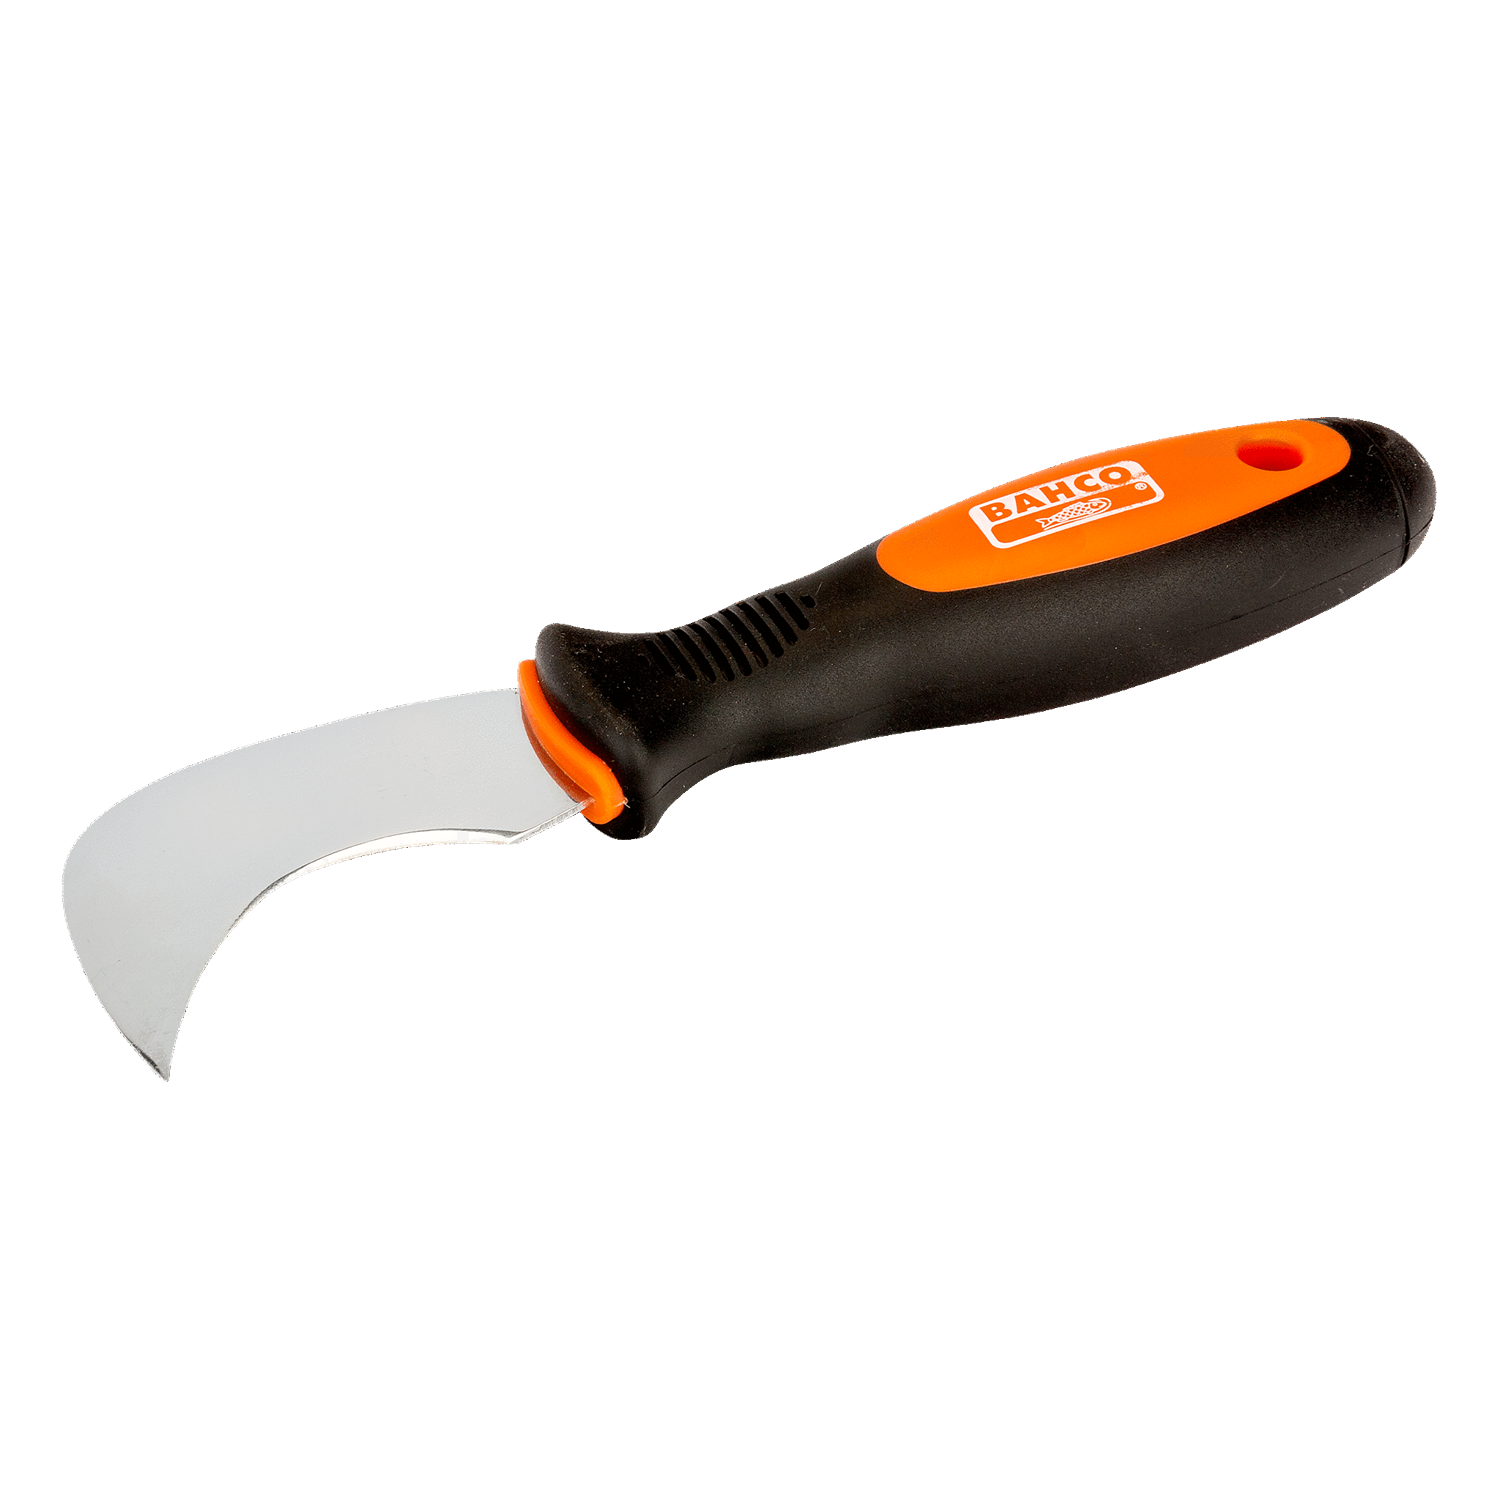 BAHCO 2488 Hook Knive with Stainless Steel Blade & Dual-Component - Premium Hook Knive from BAHCO - Shop now at Yew Aik.